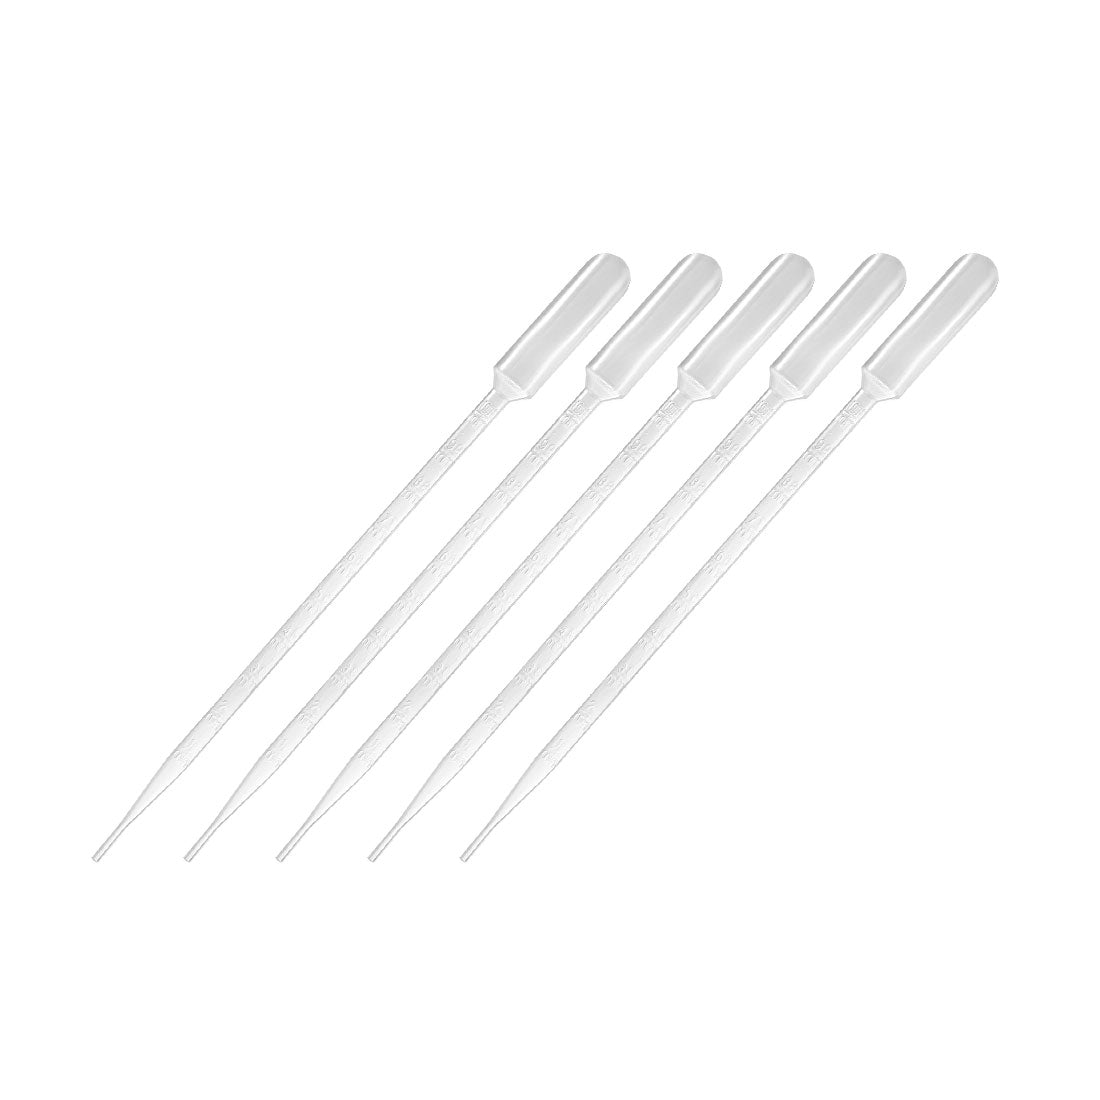 uxcell Uxcell 20 Pcs 10ml Disposable Pasteur Pipettes Test Tubes Liquid Drop Droppers Graduated 295mm Long